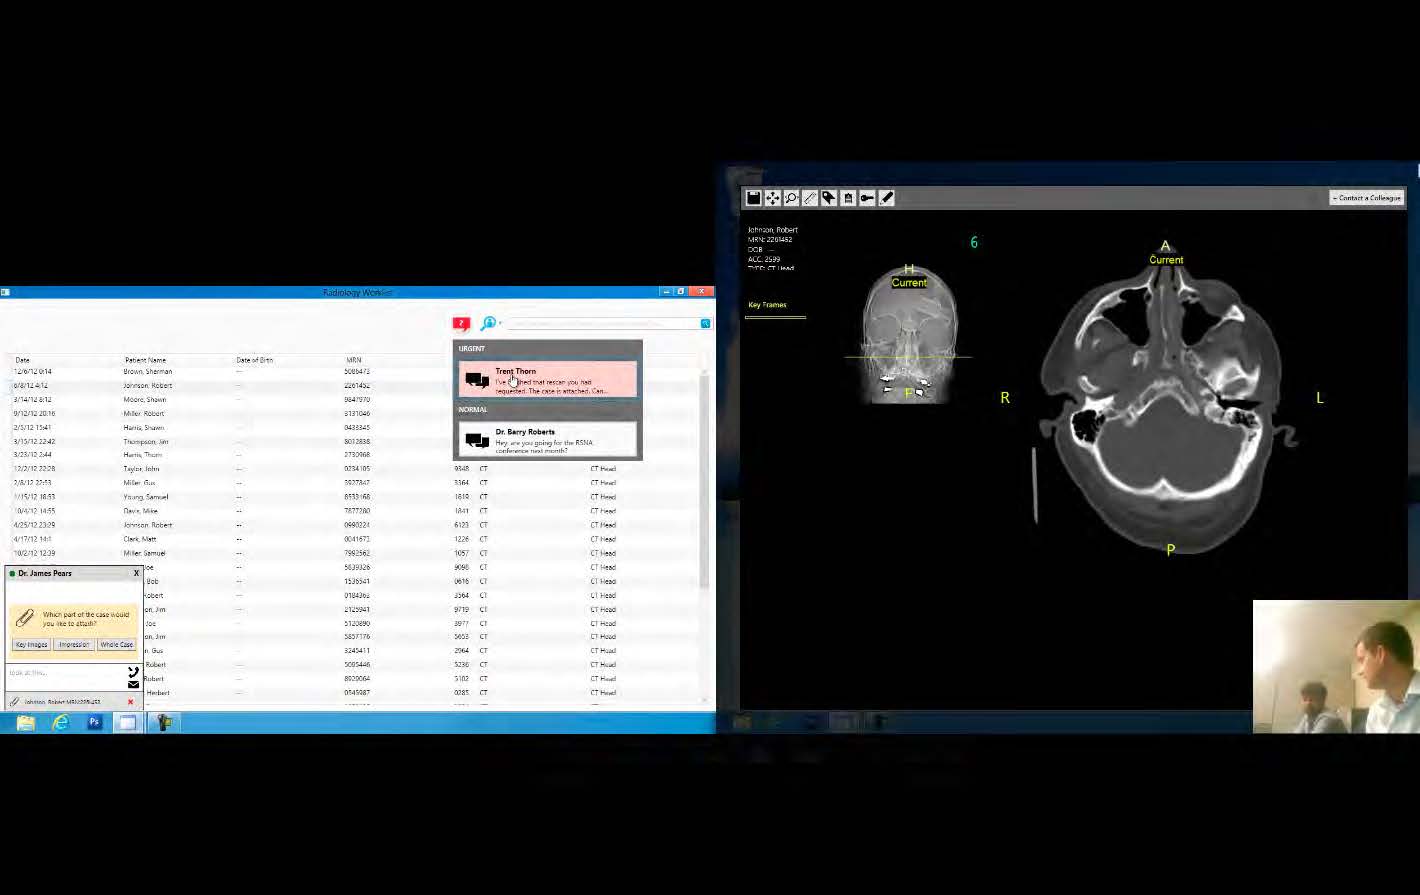 A screenshot of a live software prototype evaluation with a radiologist depicted in the bottom right-hand corner of the window